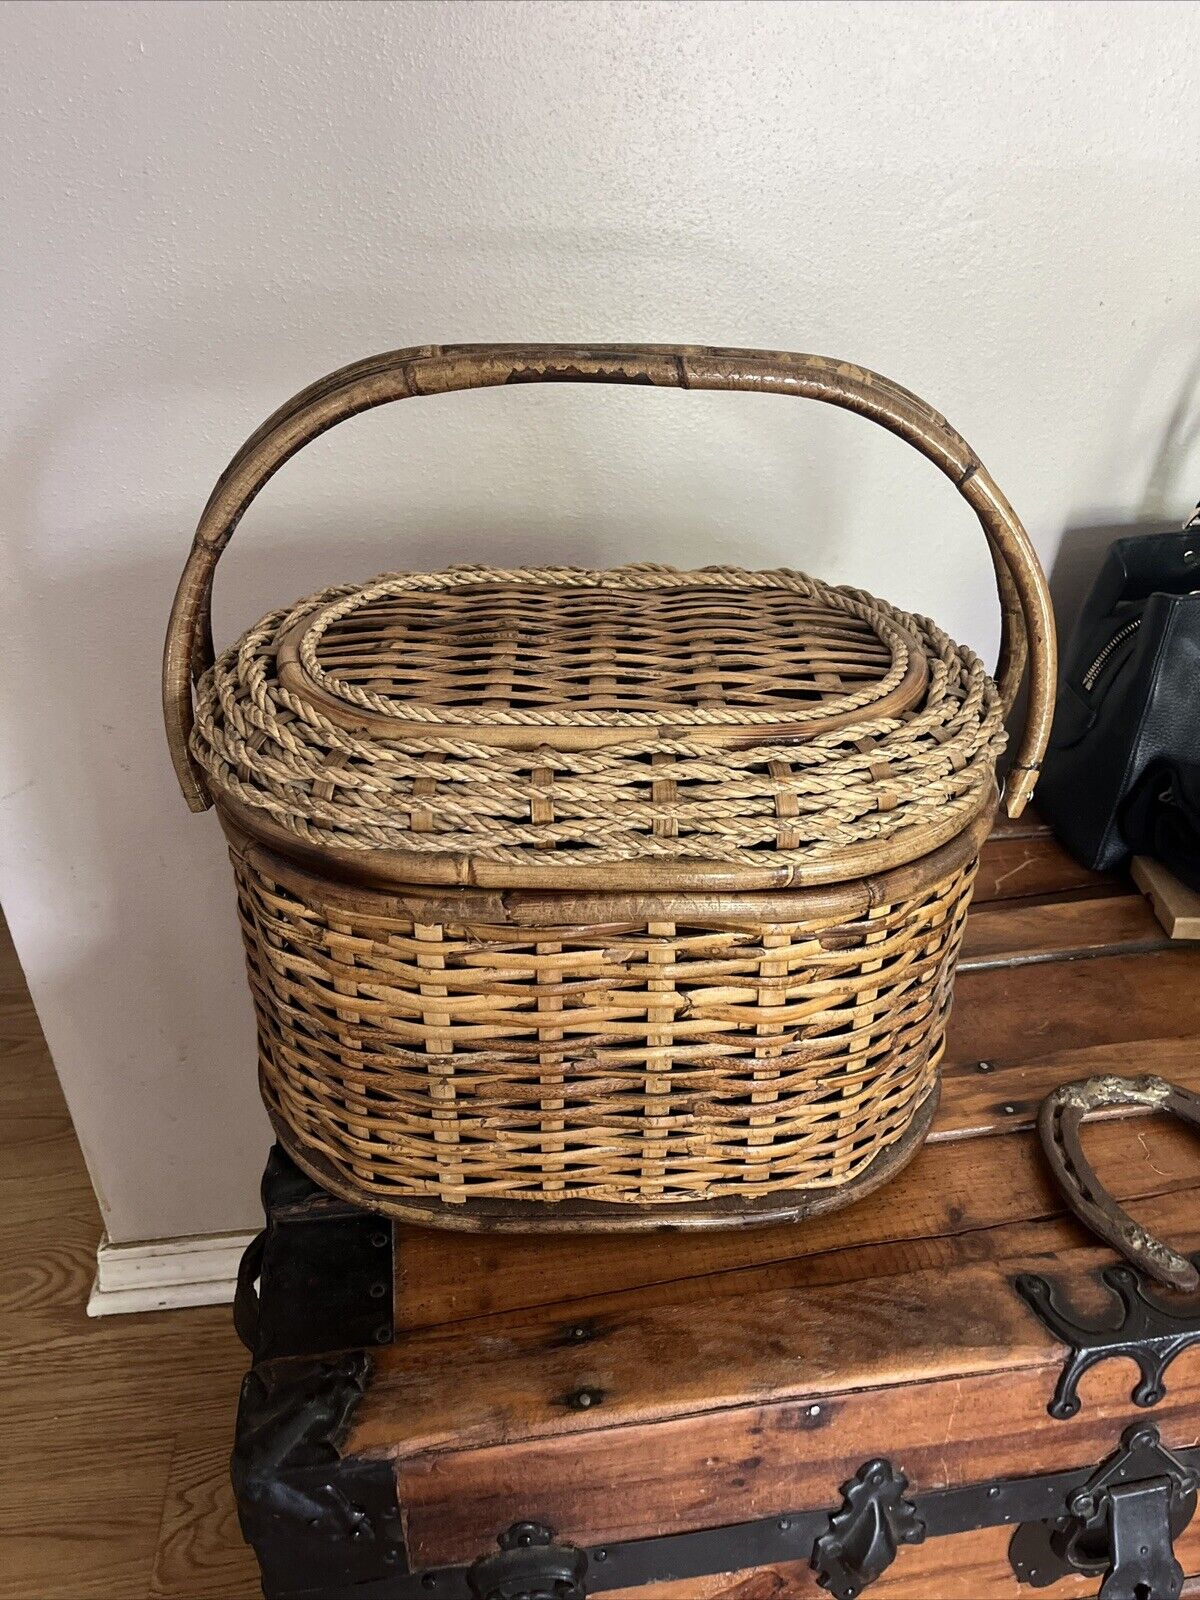 Wicker Rattan Picnic Basket With Tray From The Philippines 